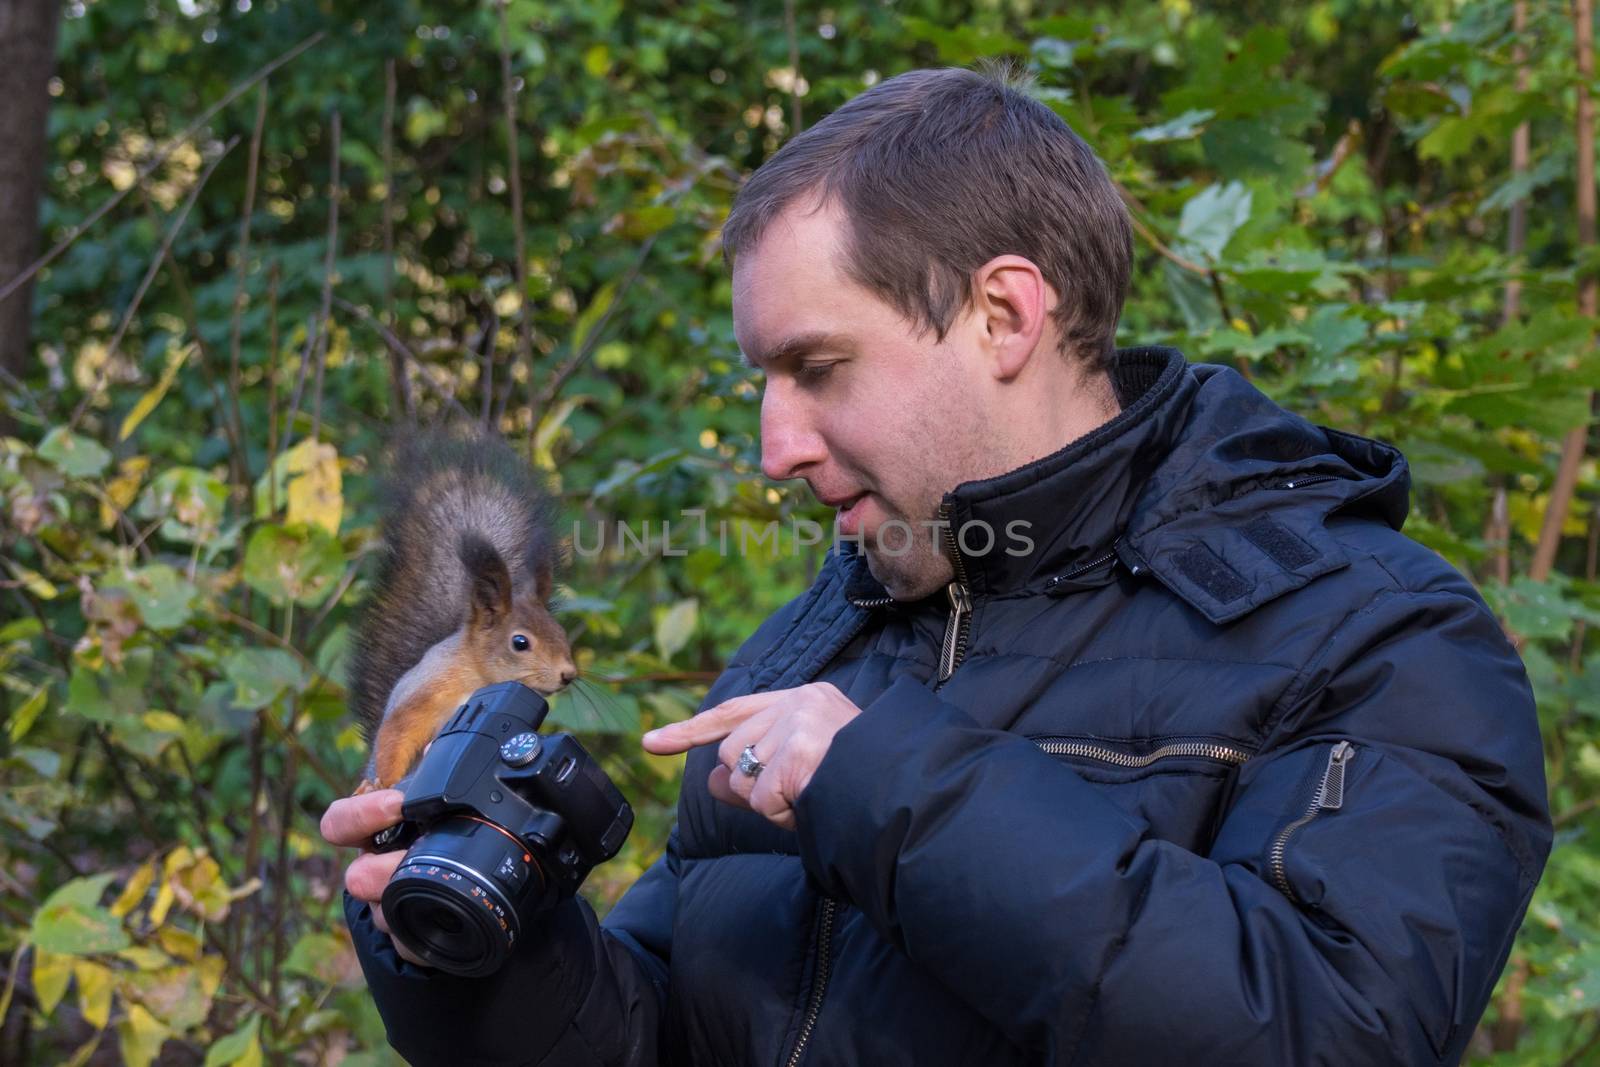 The photograph depicts a male photographer with a squirrel